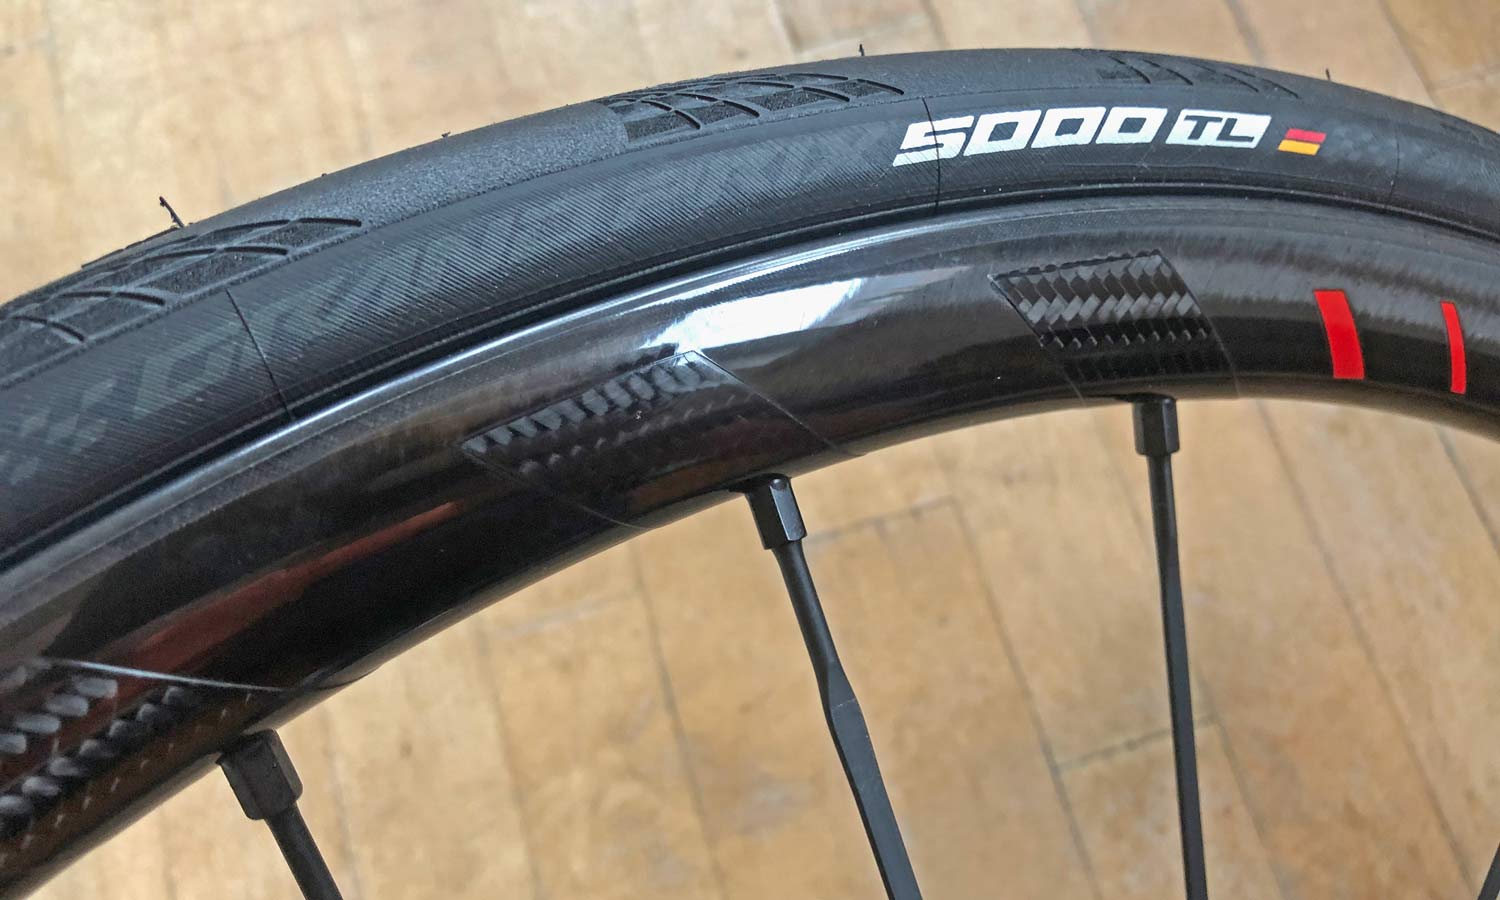 Continental GP 5000 TL all-around performance road tubeless tires, tubeless install, setup & first riding impressions